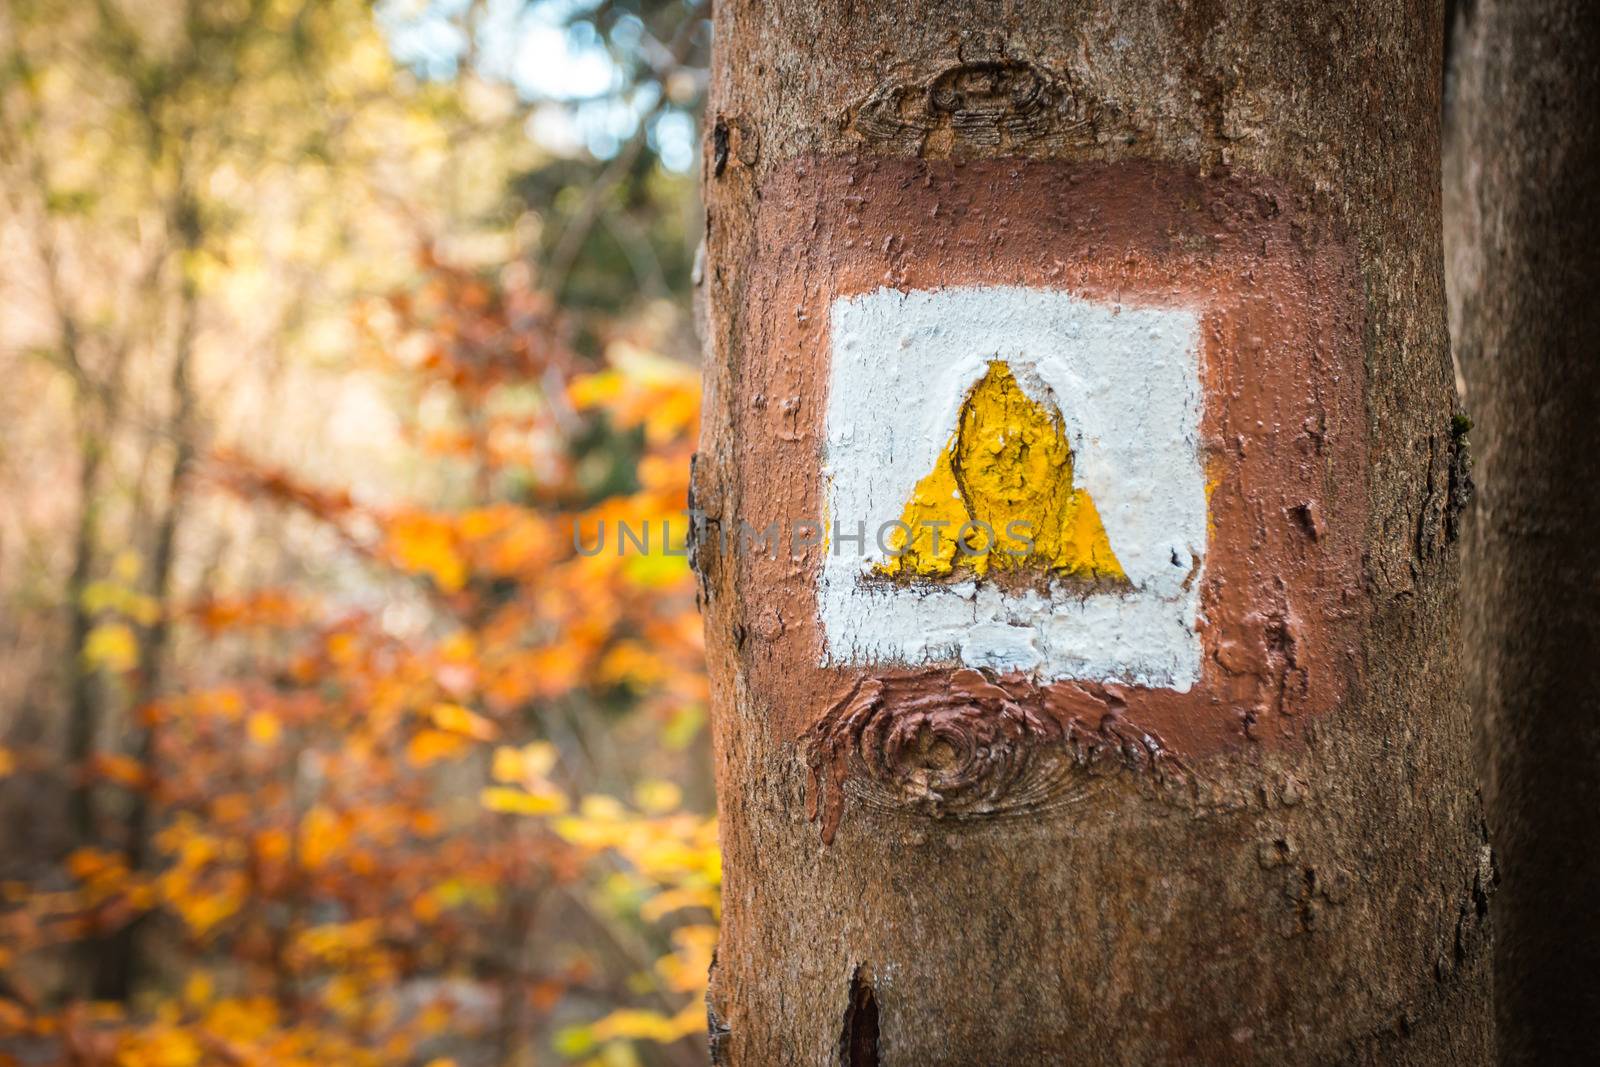 Touristic sign or mark on tree next to touristic path with nice autumn scene in background.